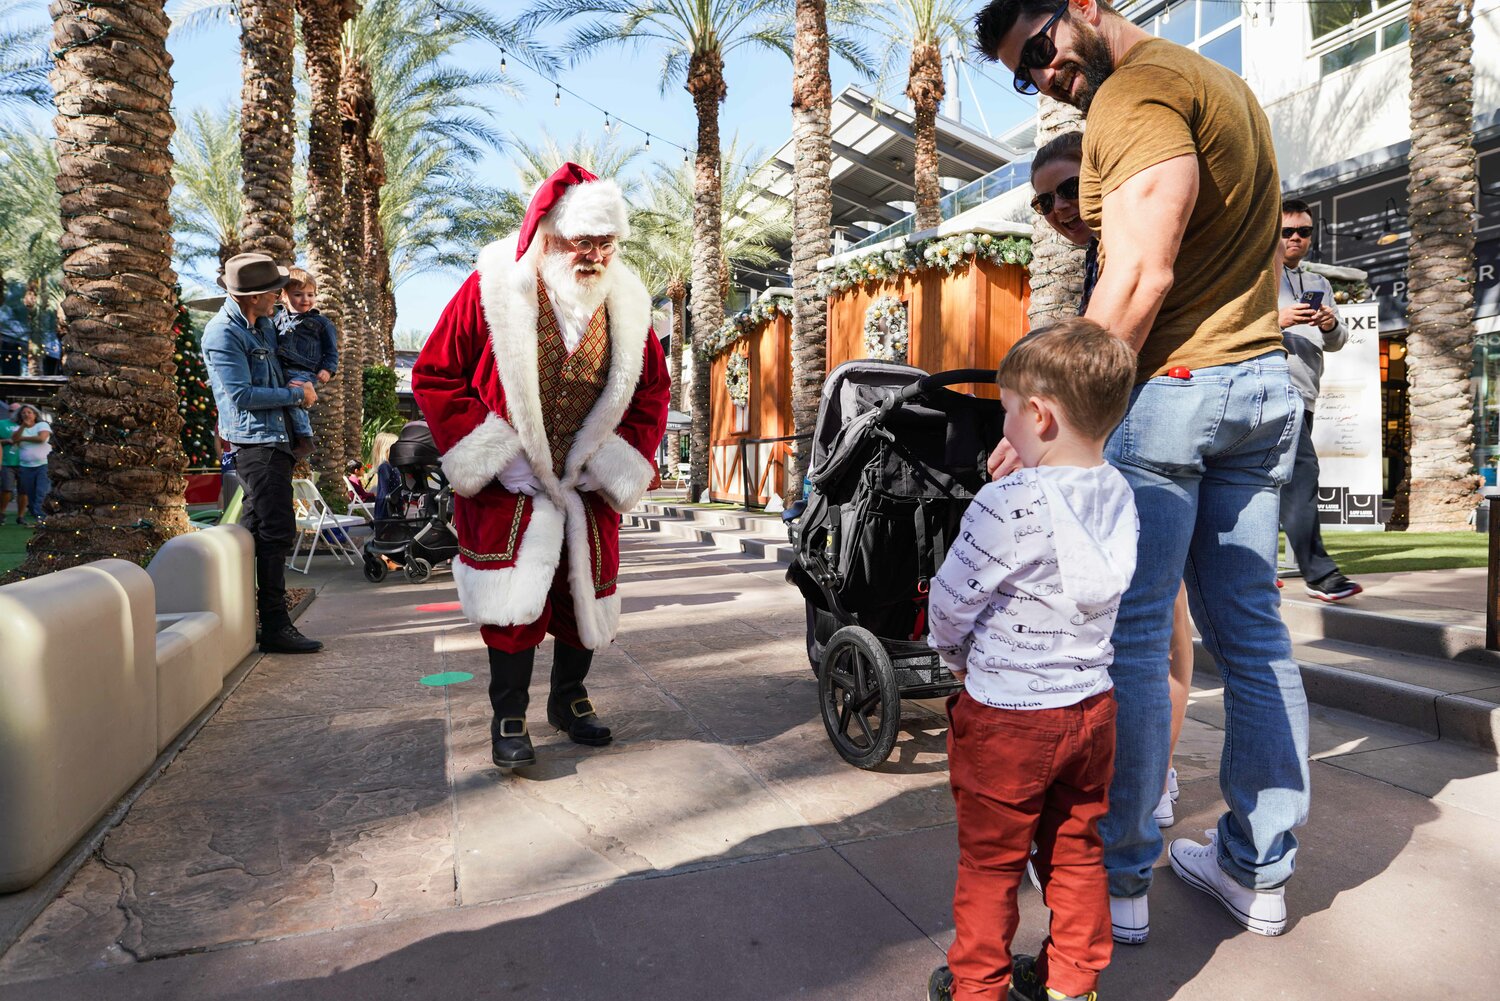 The Santa Social features family-friendly activities including photos with the jolly man in red, live entertainment, a tree lighting ceremony and a movie under the stars.